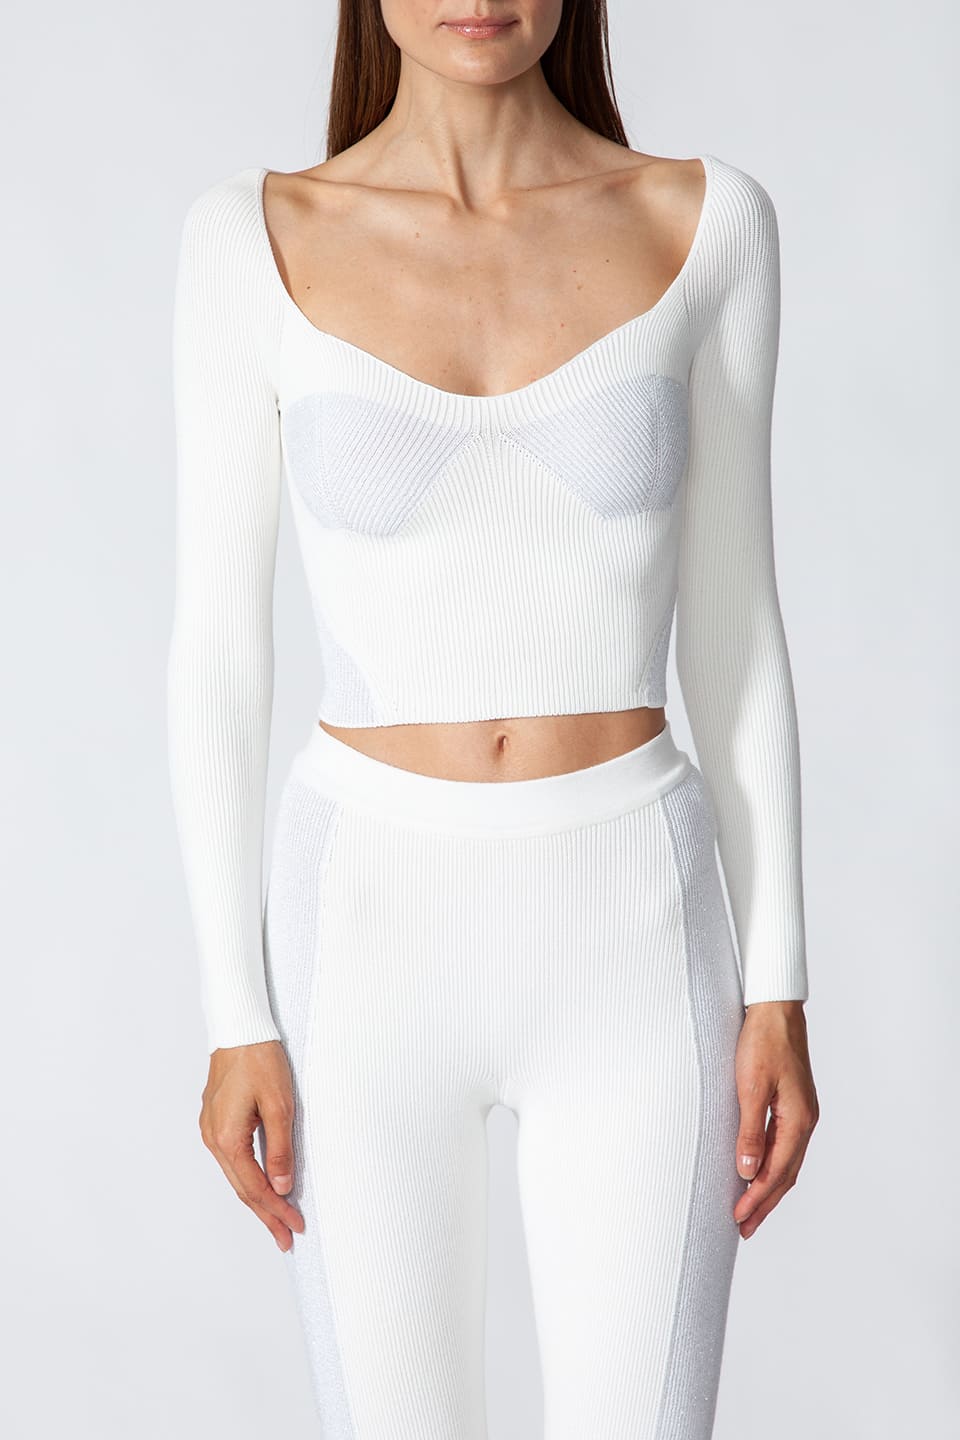 Model in pose while wearing fashion artist Kukhareva London's trendy white top, with cut out neckline and inserts threaded with metallic, shimmering yarn.